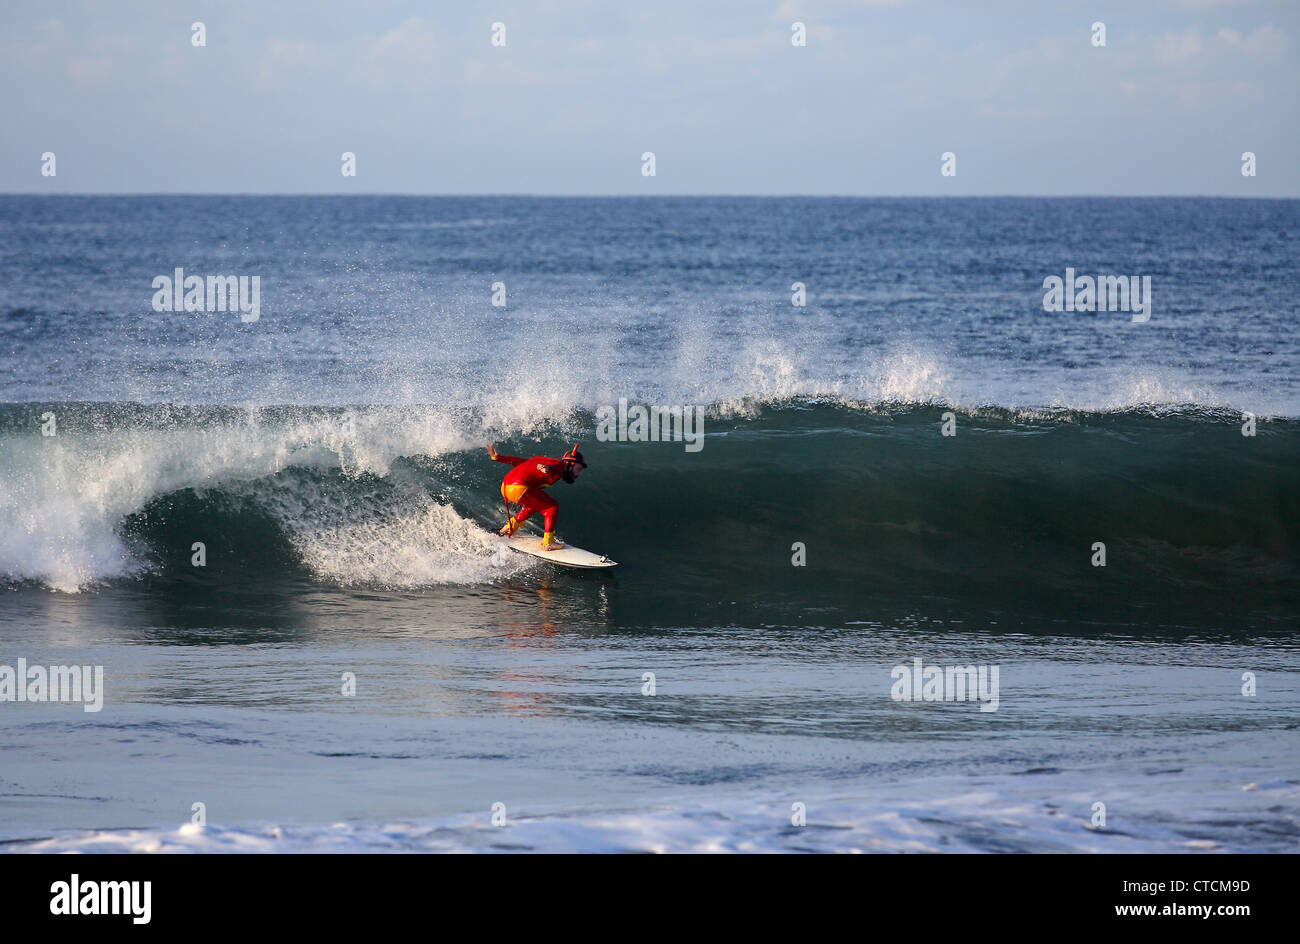 Bearded man surfing a wave wearing red superhero costume. Stock Photo